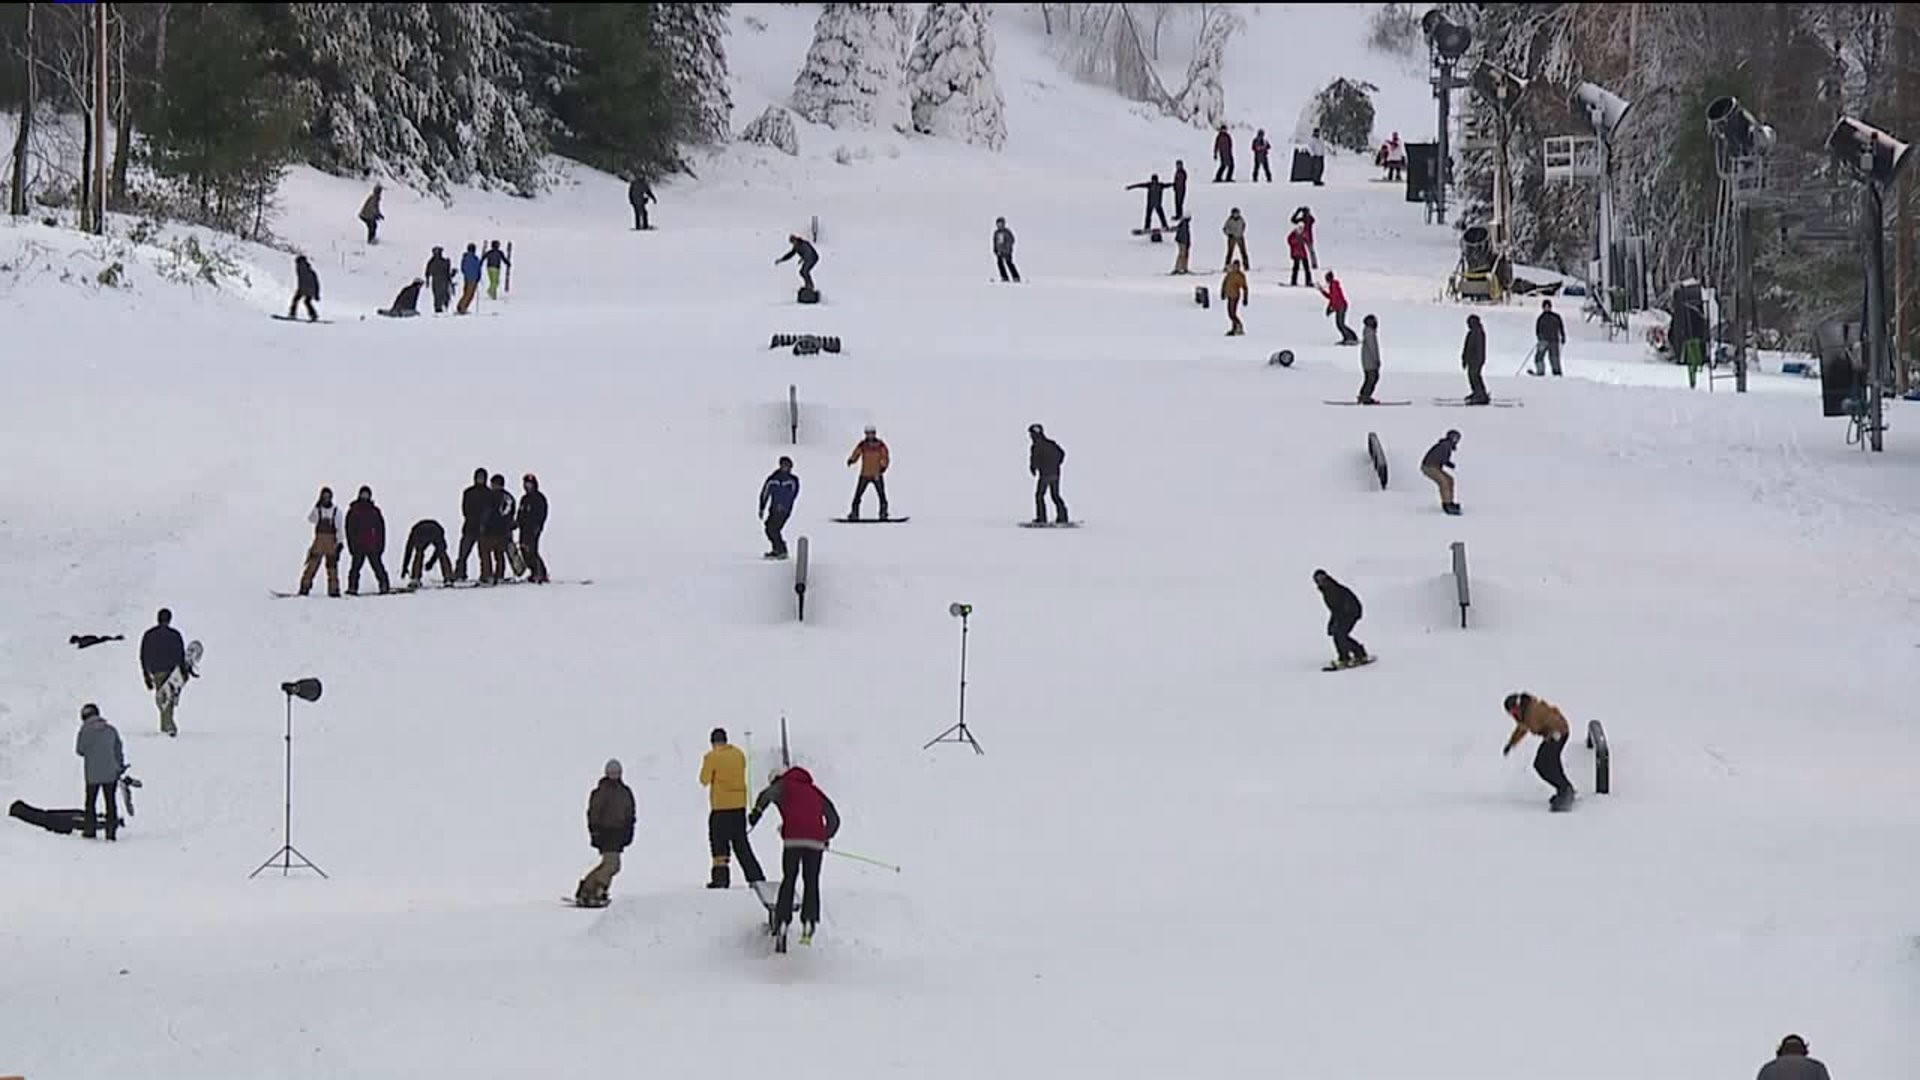 Big Boulder Park First to Open for Ski Season Again